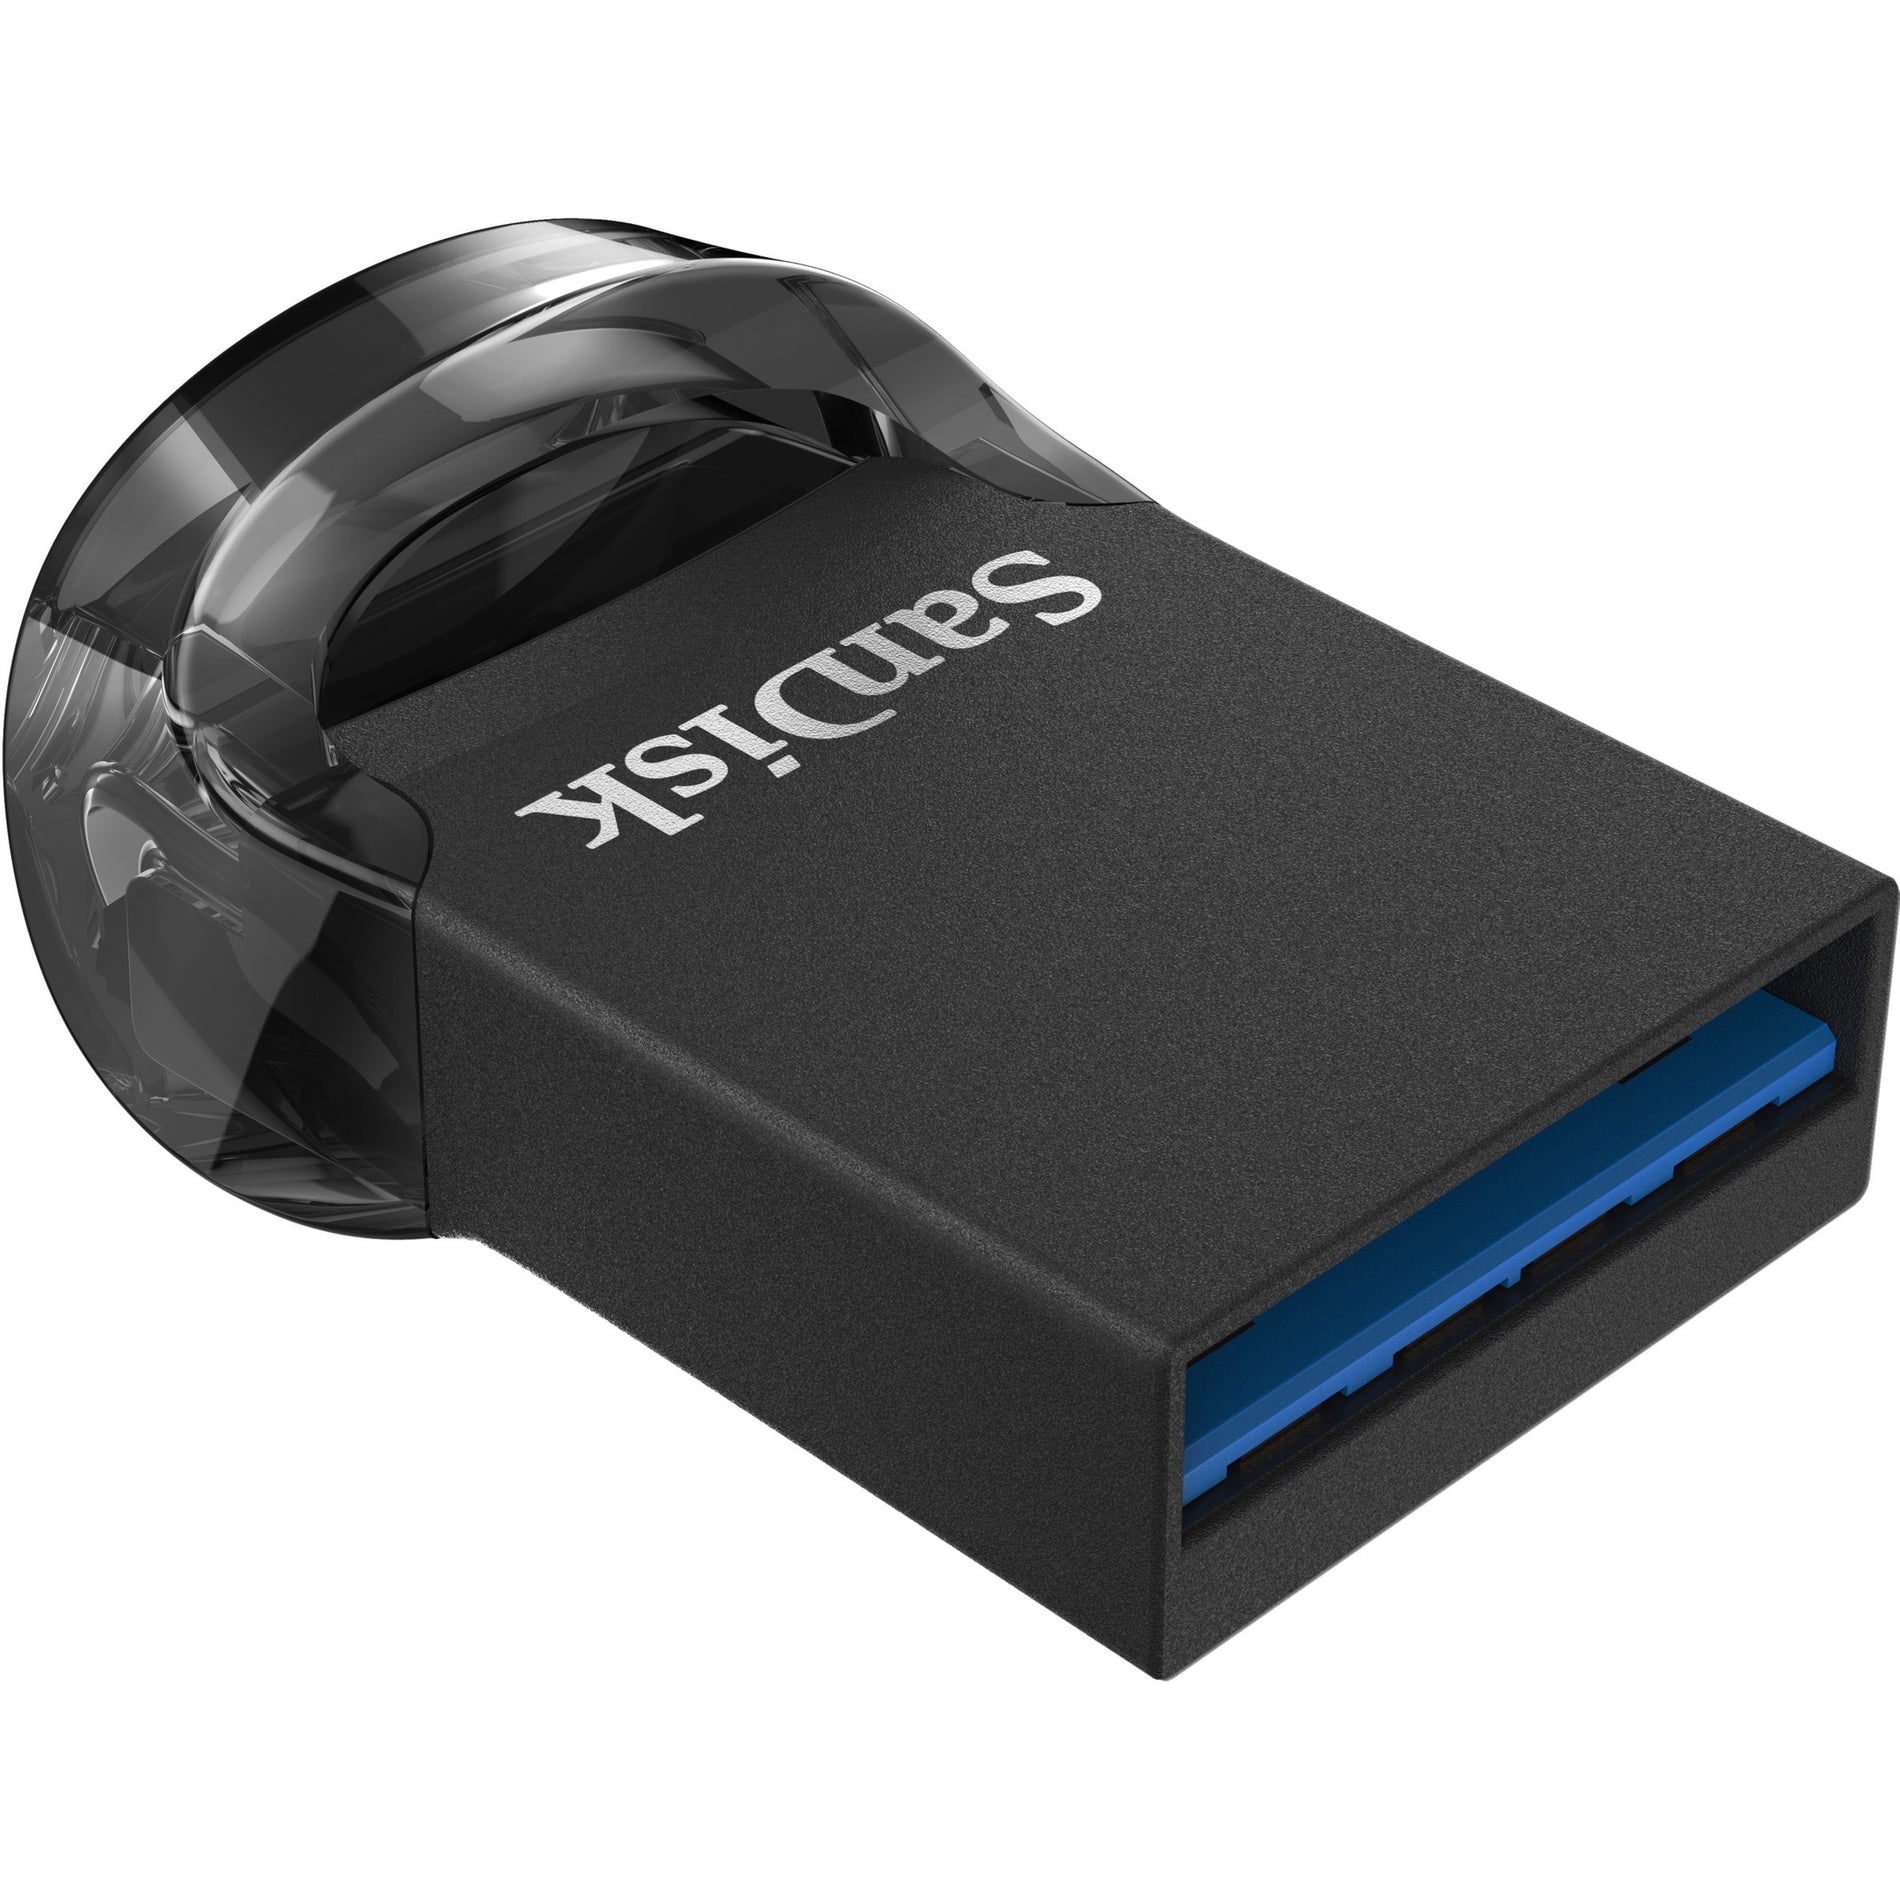 SanDisk SDCZ430-032G-A46 Ultra Fit USB 3.1 Flash Drive 32GB High-Speed Data Transfer and Compact Design